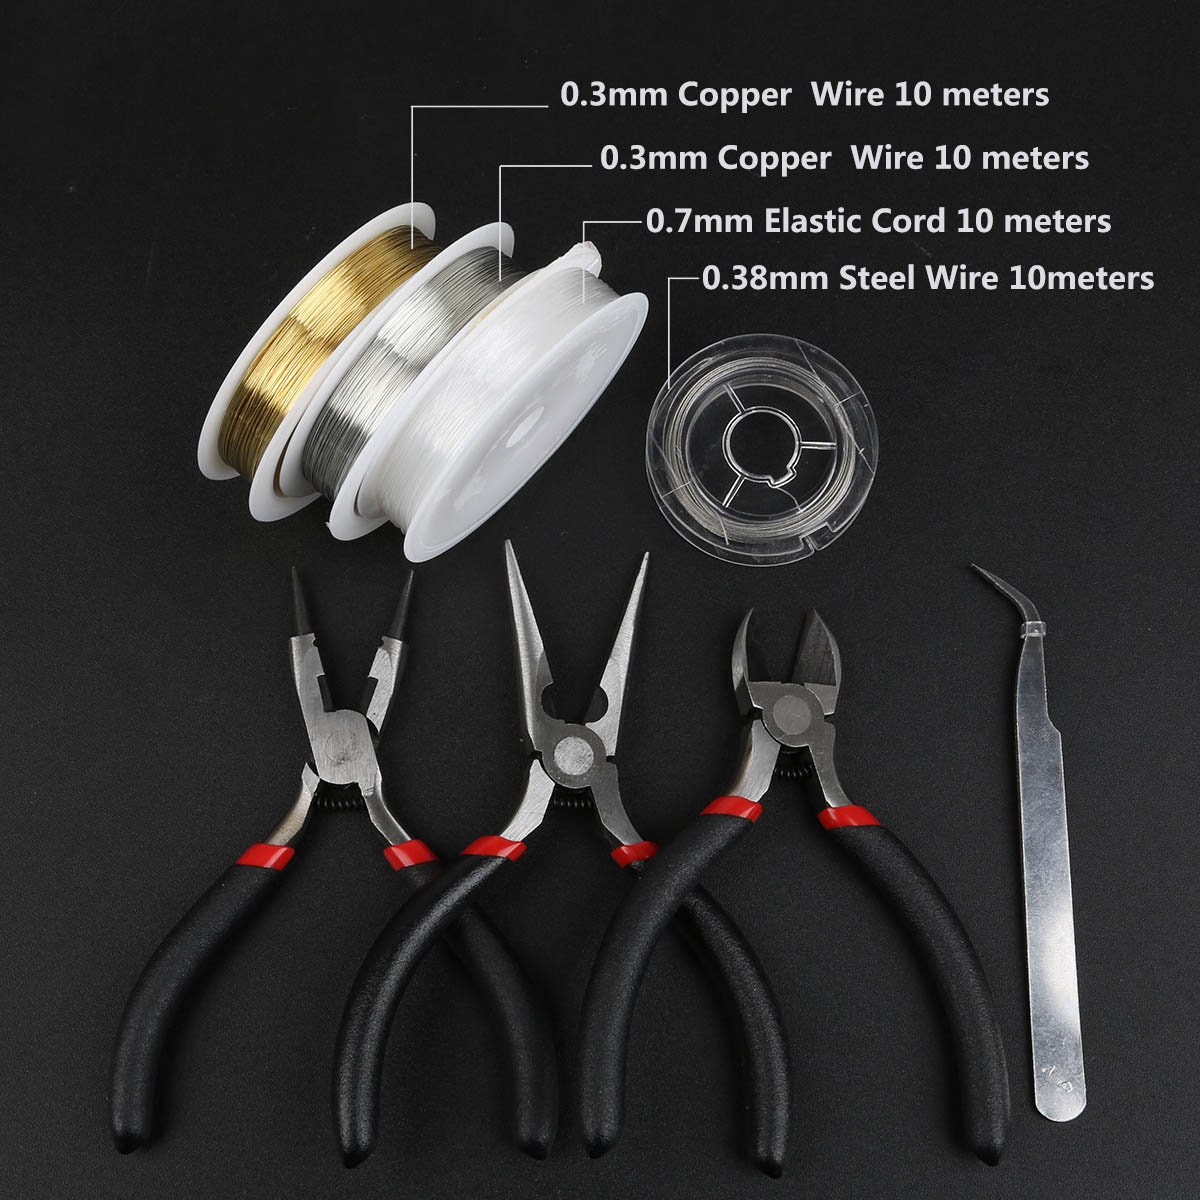 4pcs Jewelry Pliers Set Beading Making Hobby Craft DIY Wire Cutter Plier  Tool